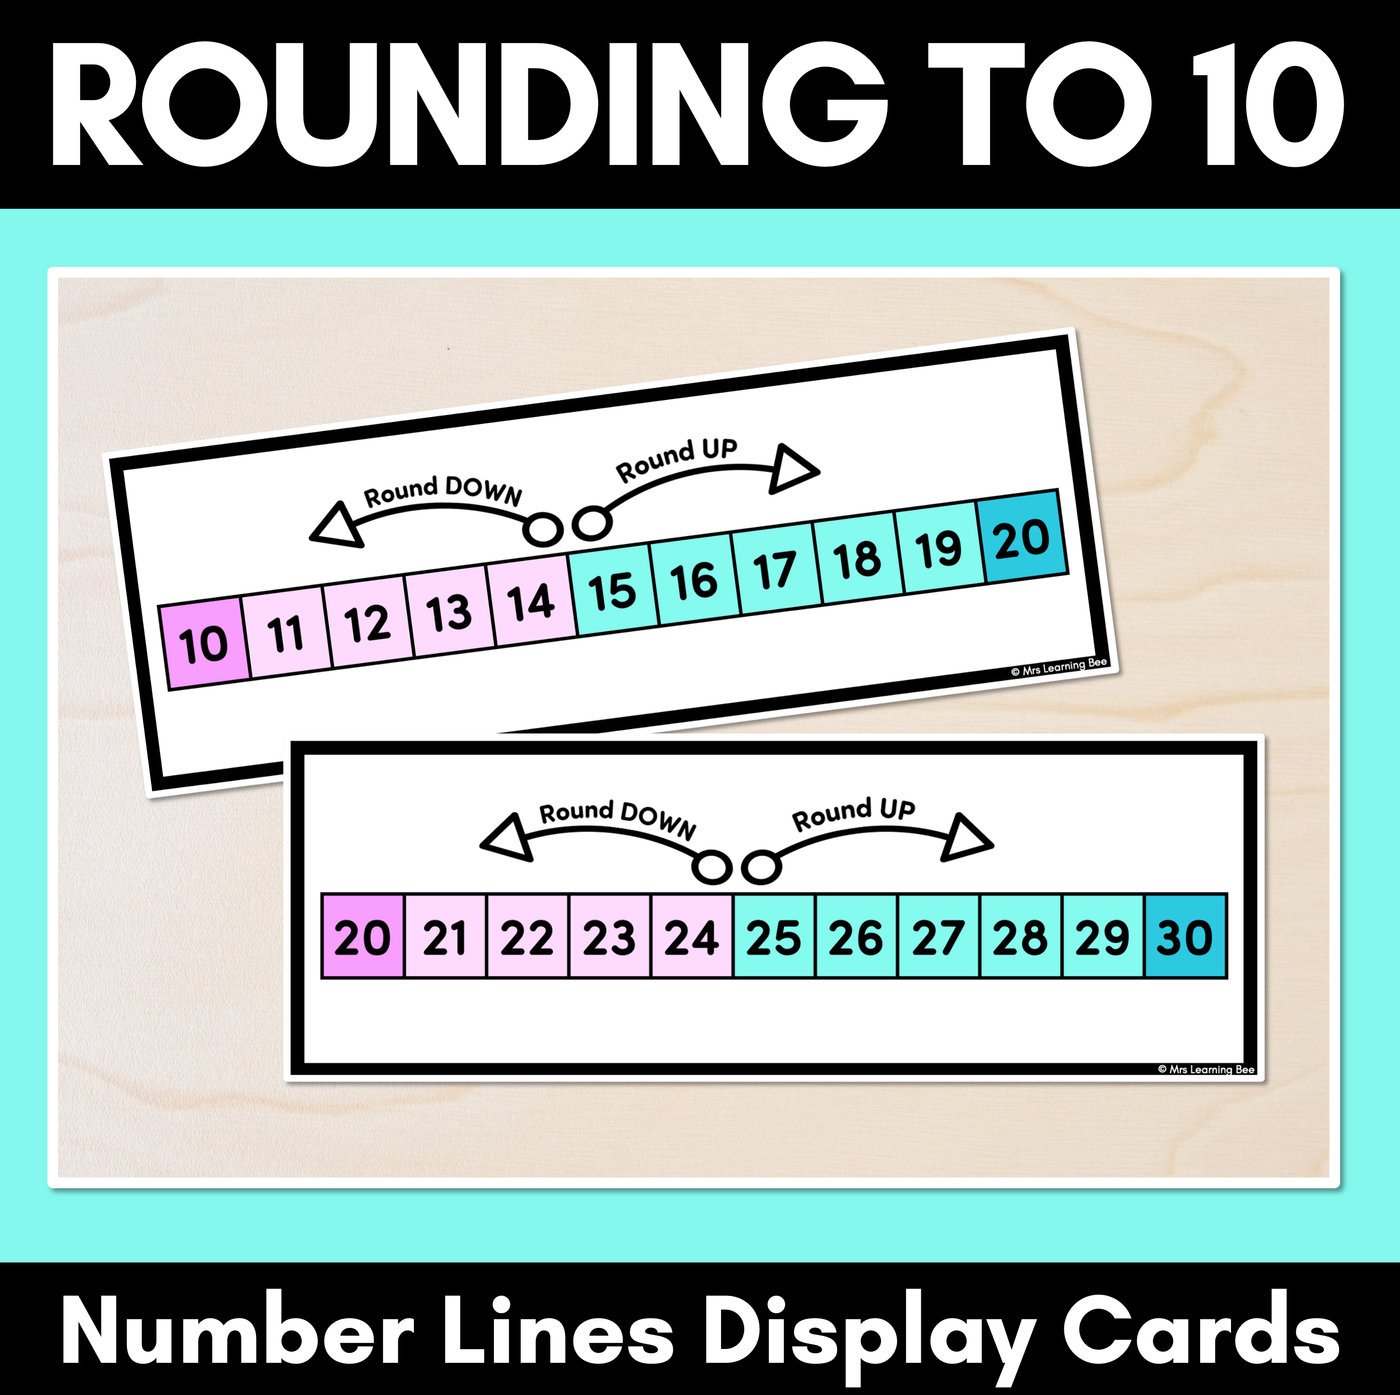 Rounding to 10 - Number Lines Display Cards & Desk Companions